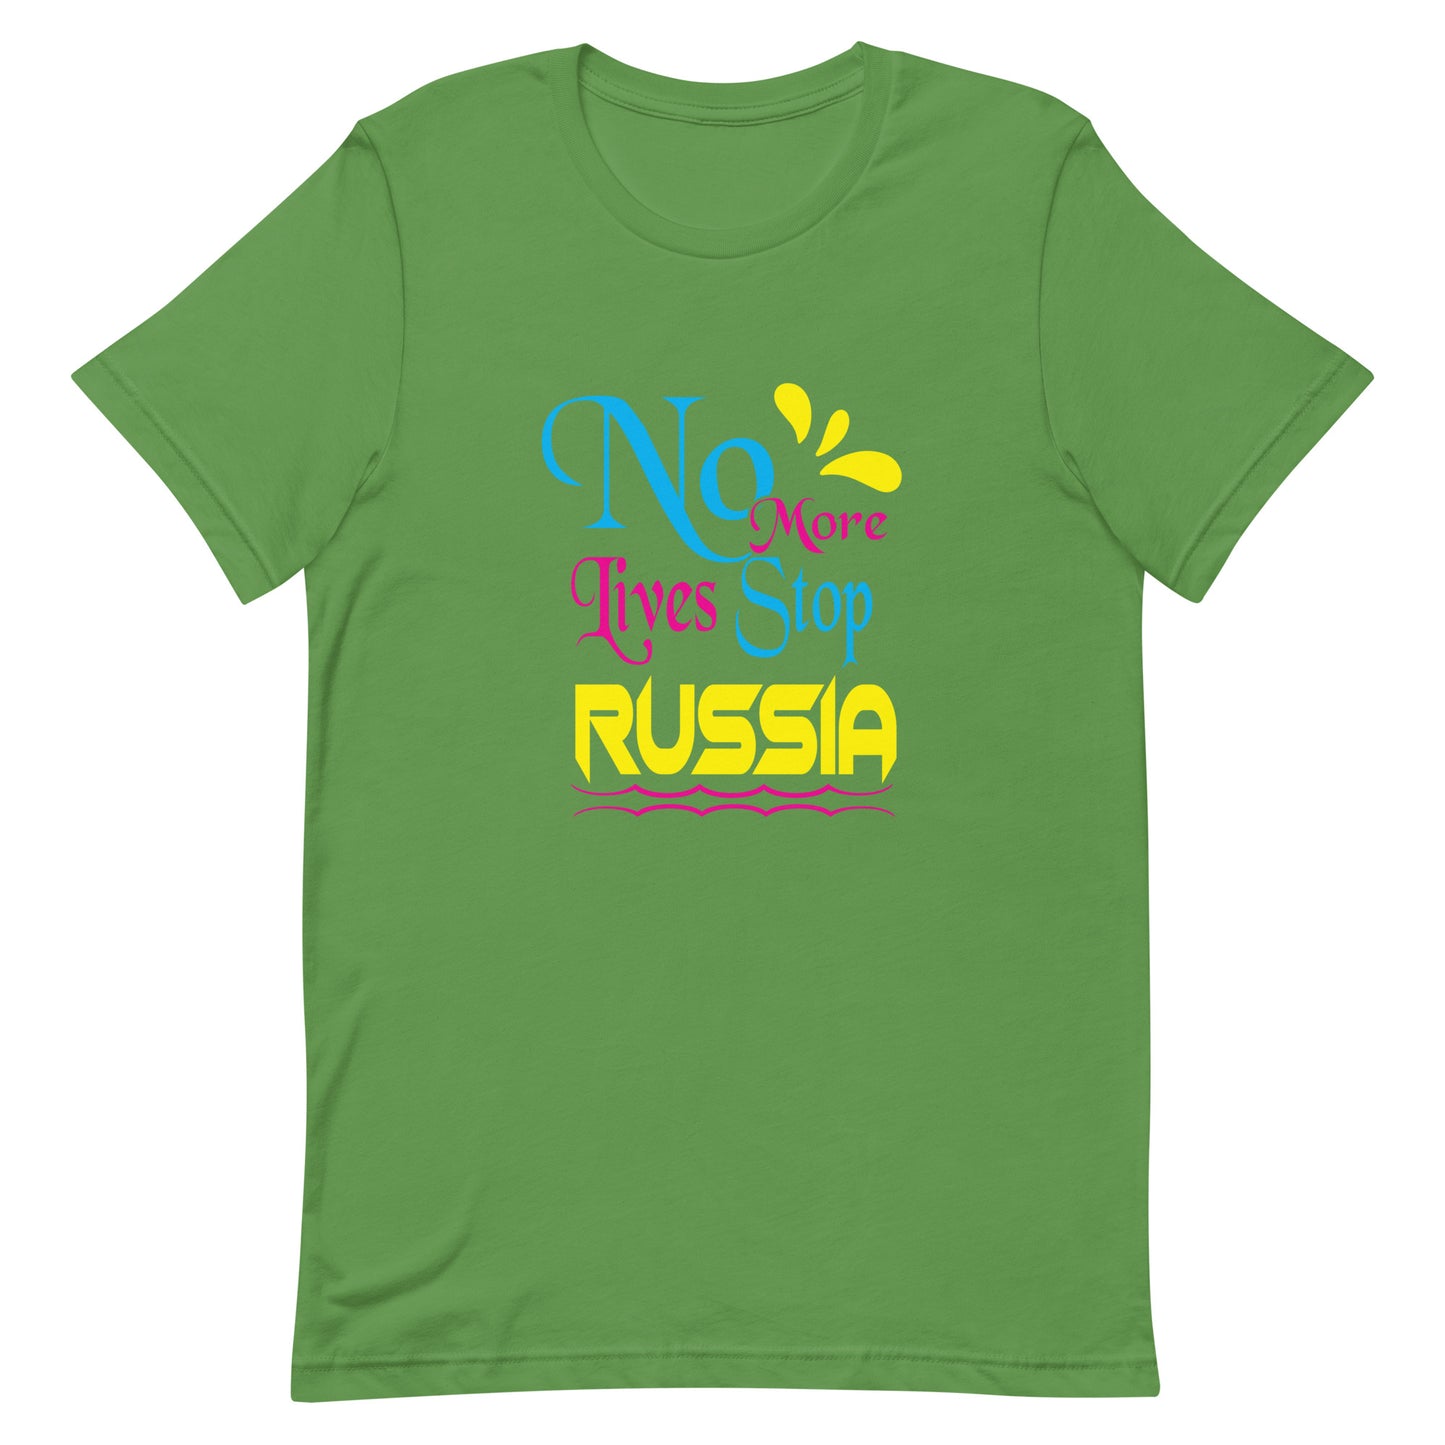 No more lives stop Russia | Unisex t-shirt